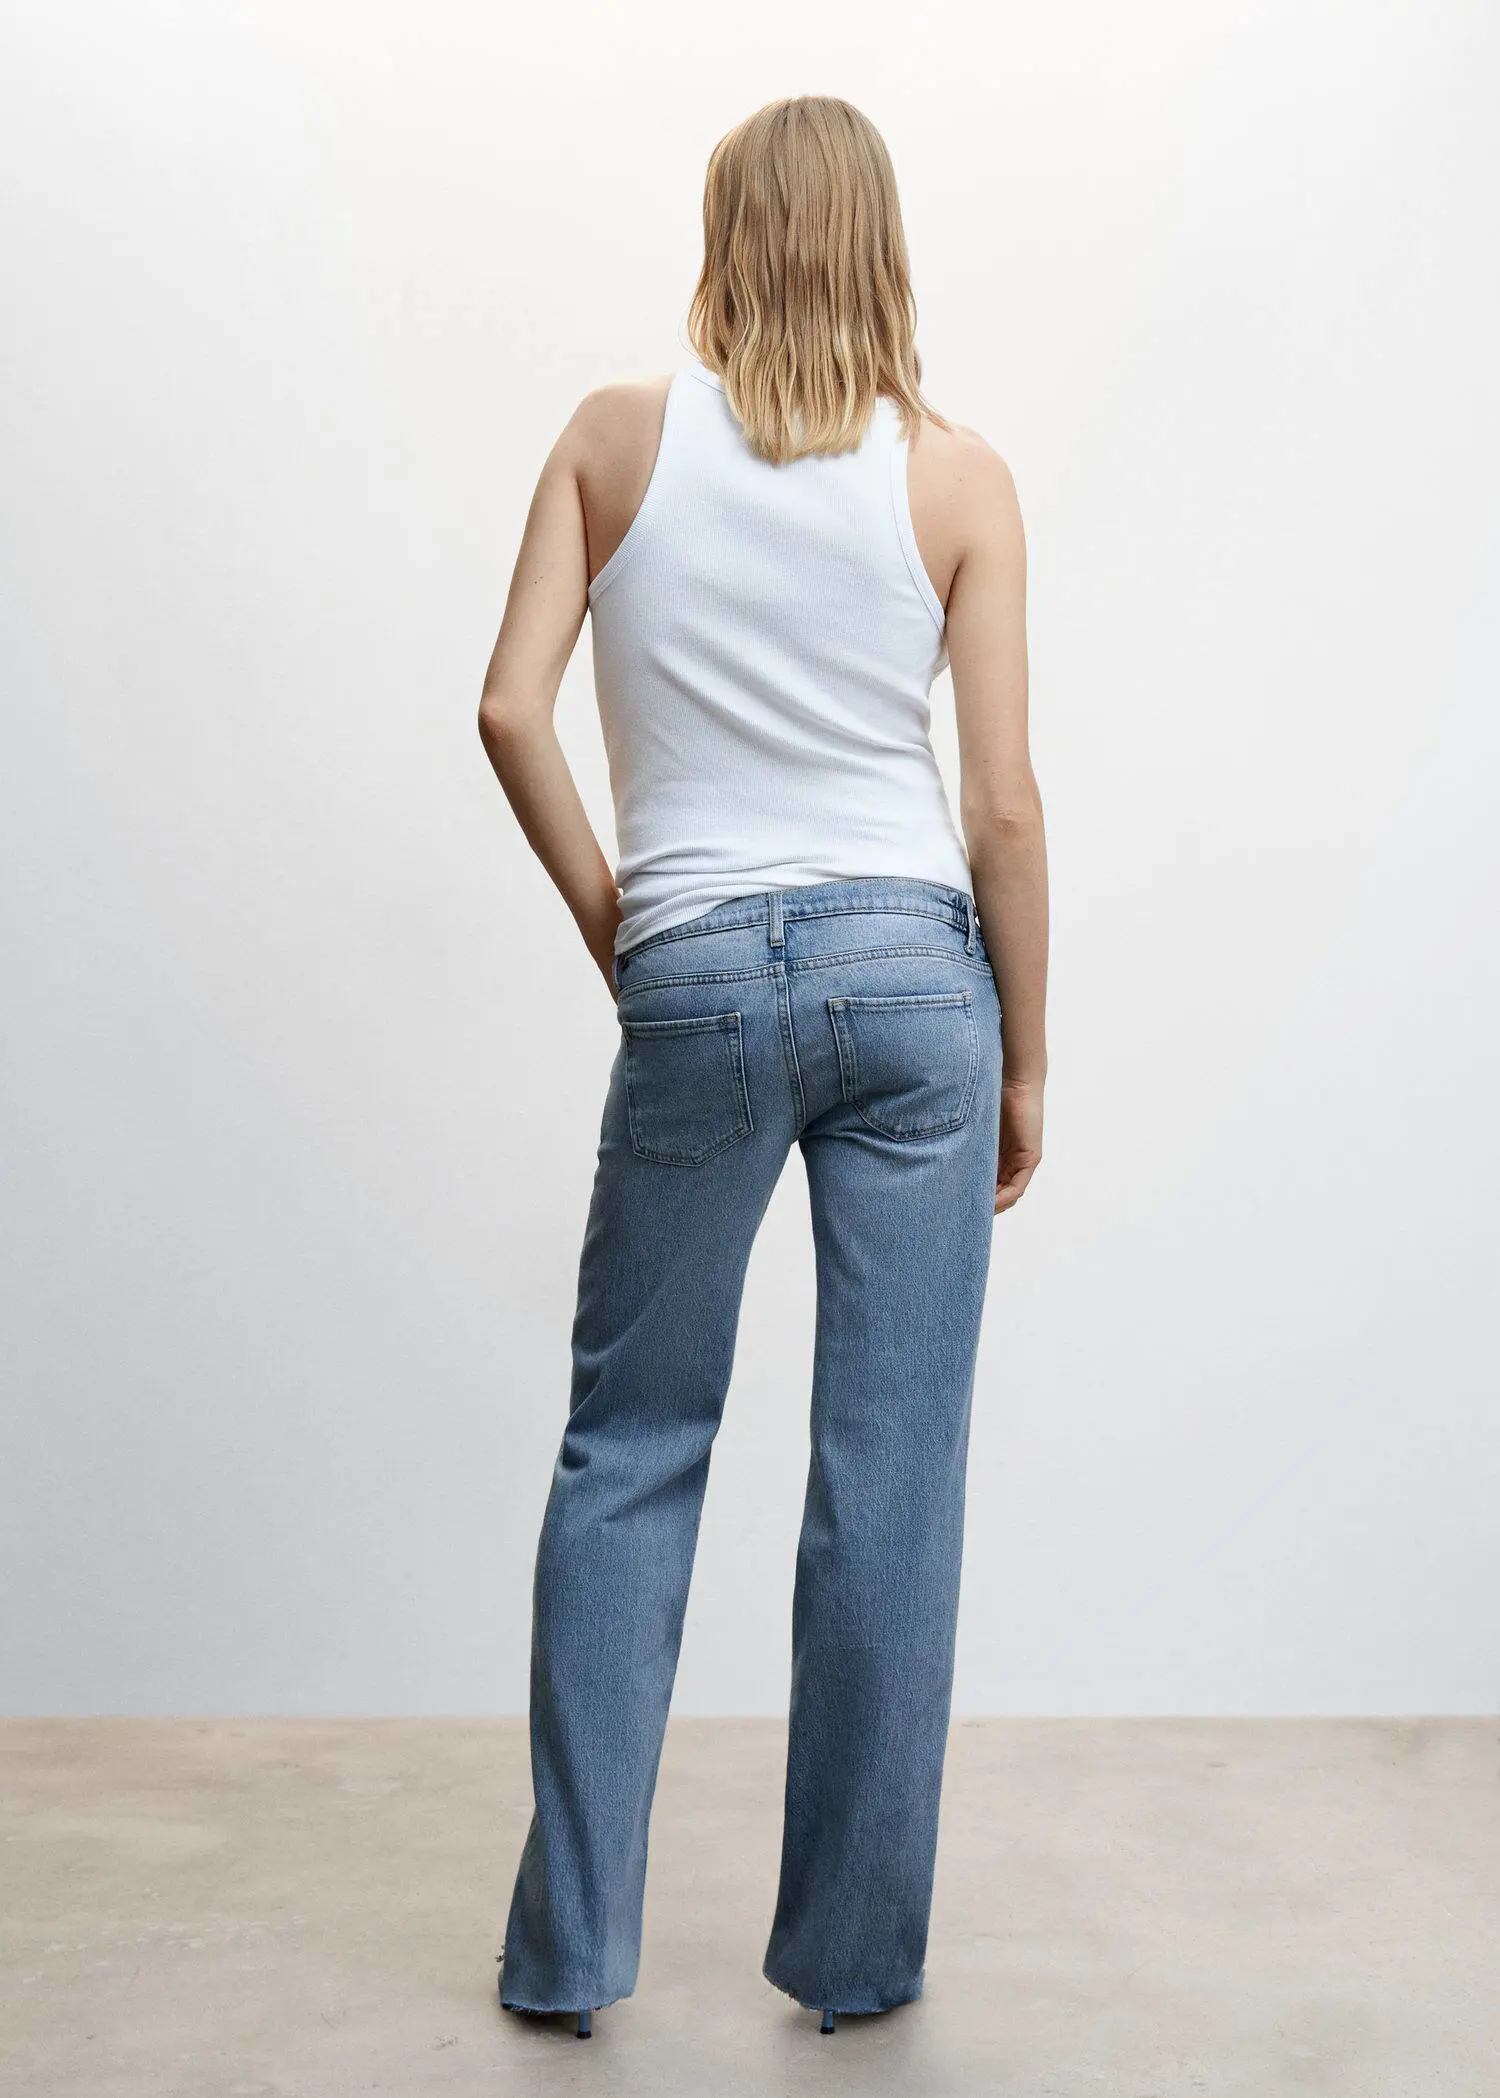 Mango Maternity wideleg jeans. a woman standing in front of a white wall. 